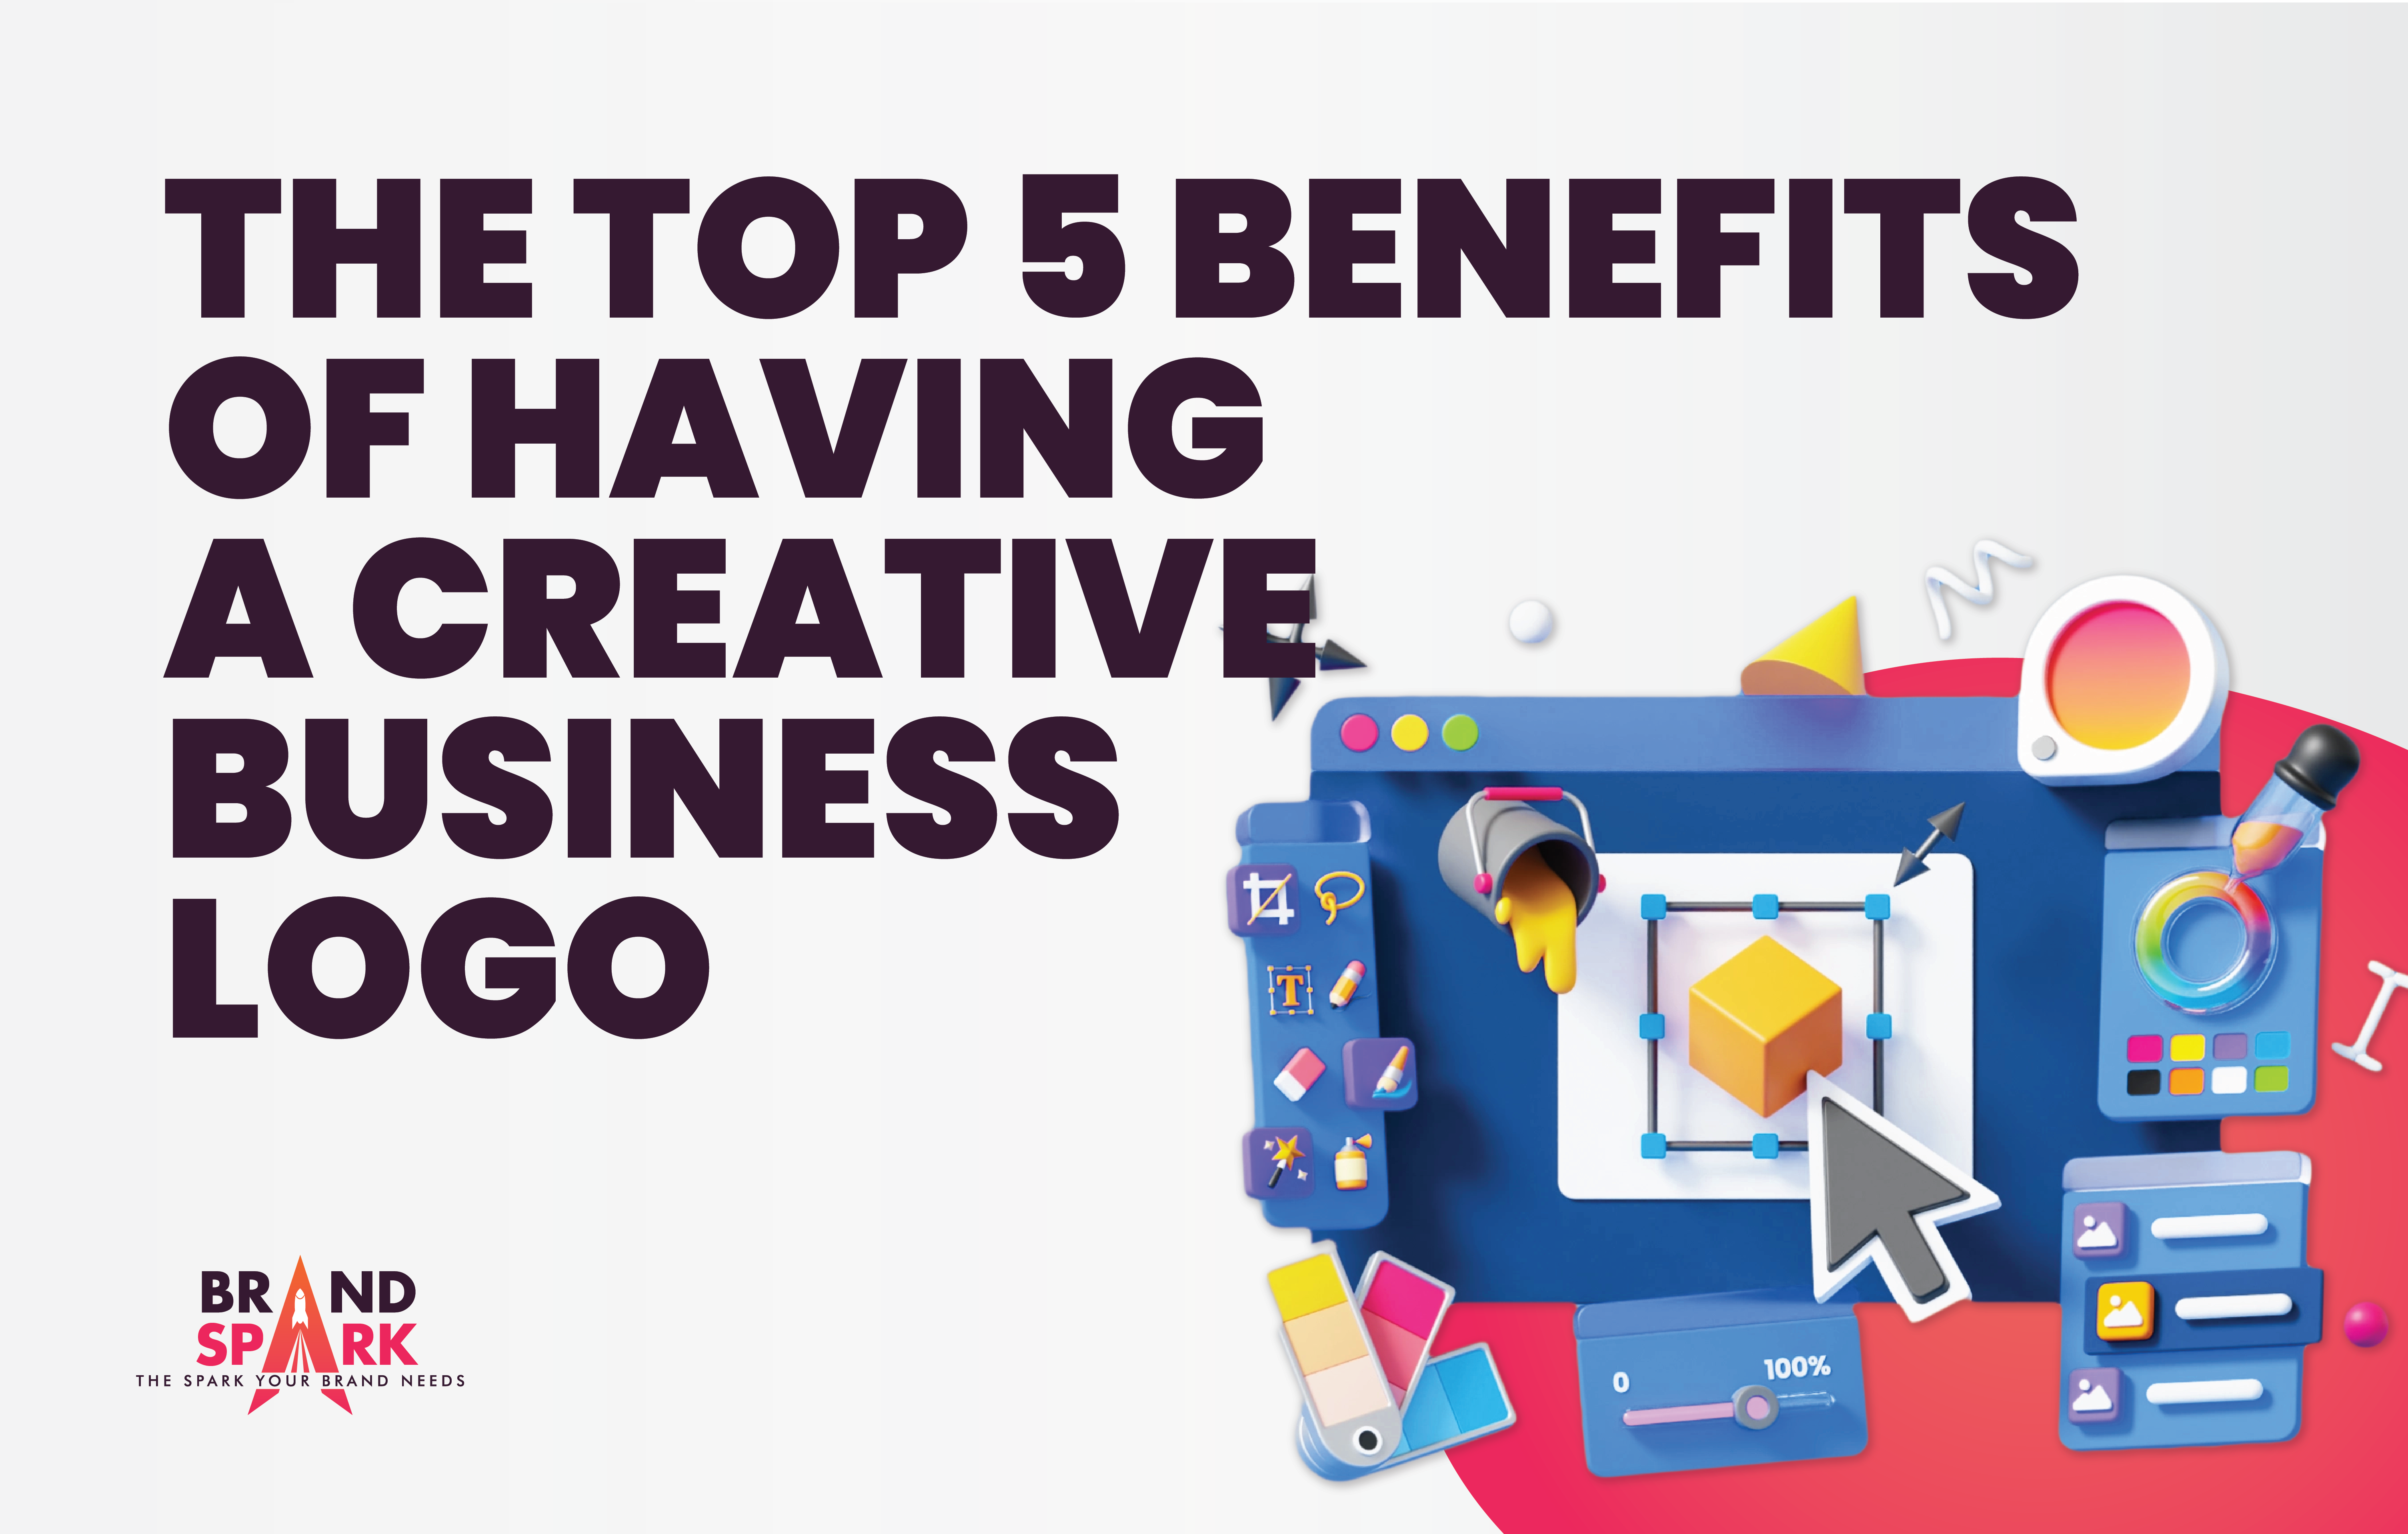 The Top 5 Benefits of Having a Creative Business Logo￼